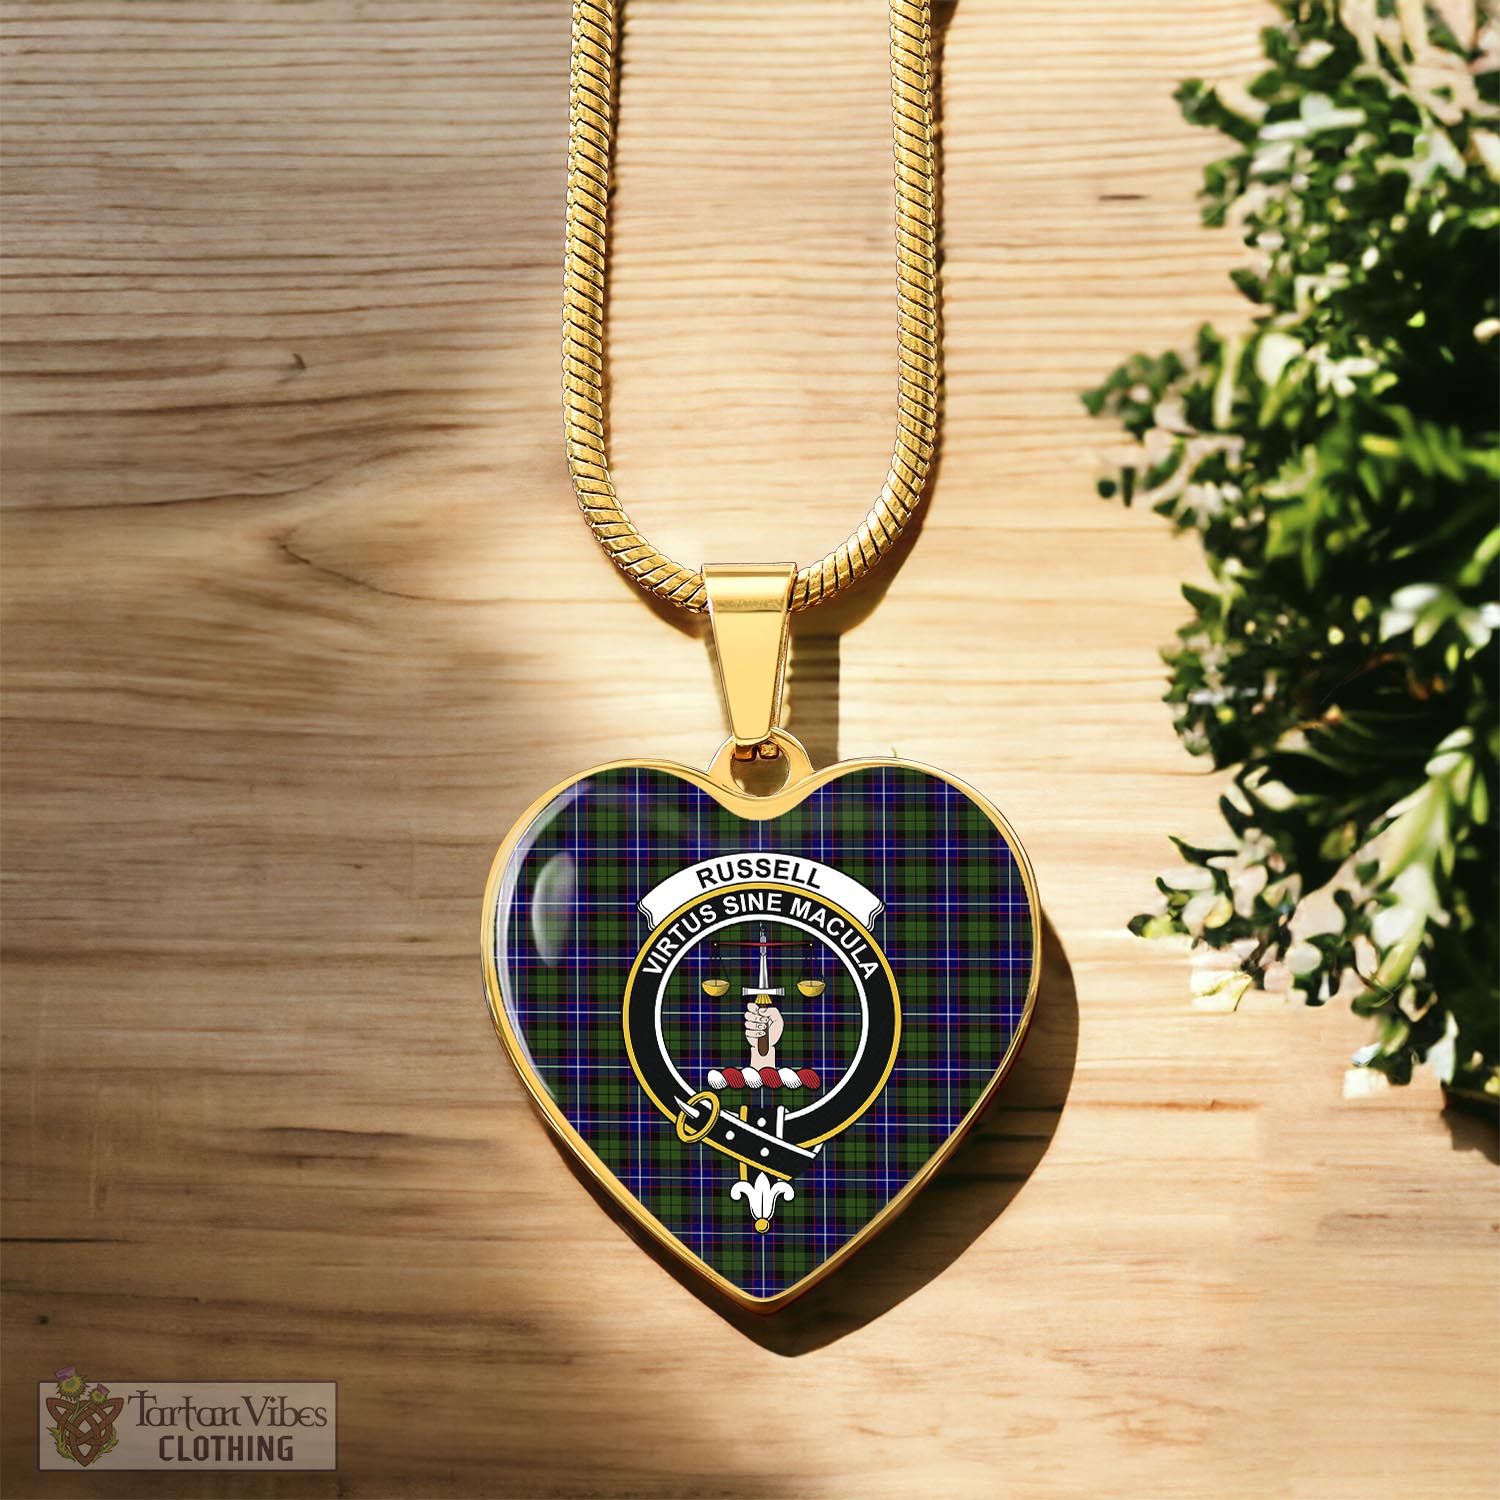 Tartan Vibes Clothing Russell Modern Tartan Heart Necklace with Family Crest